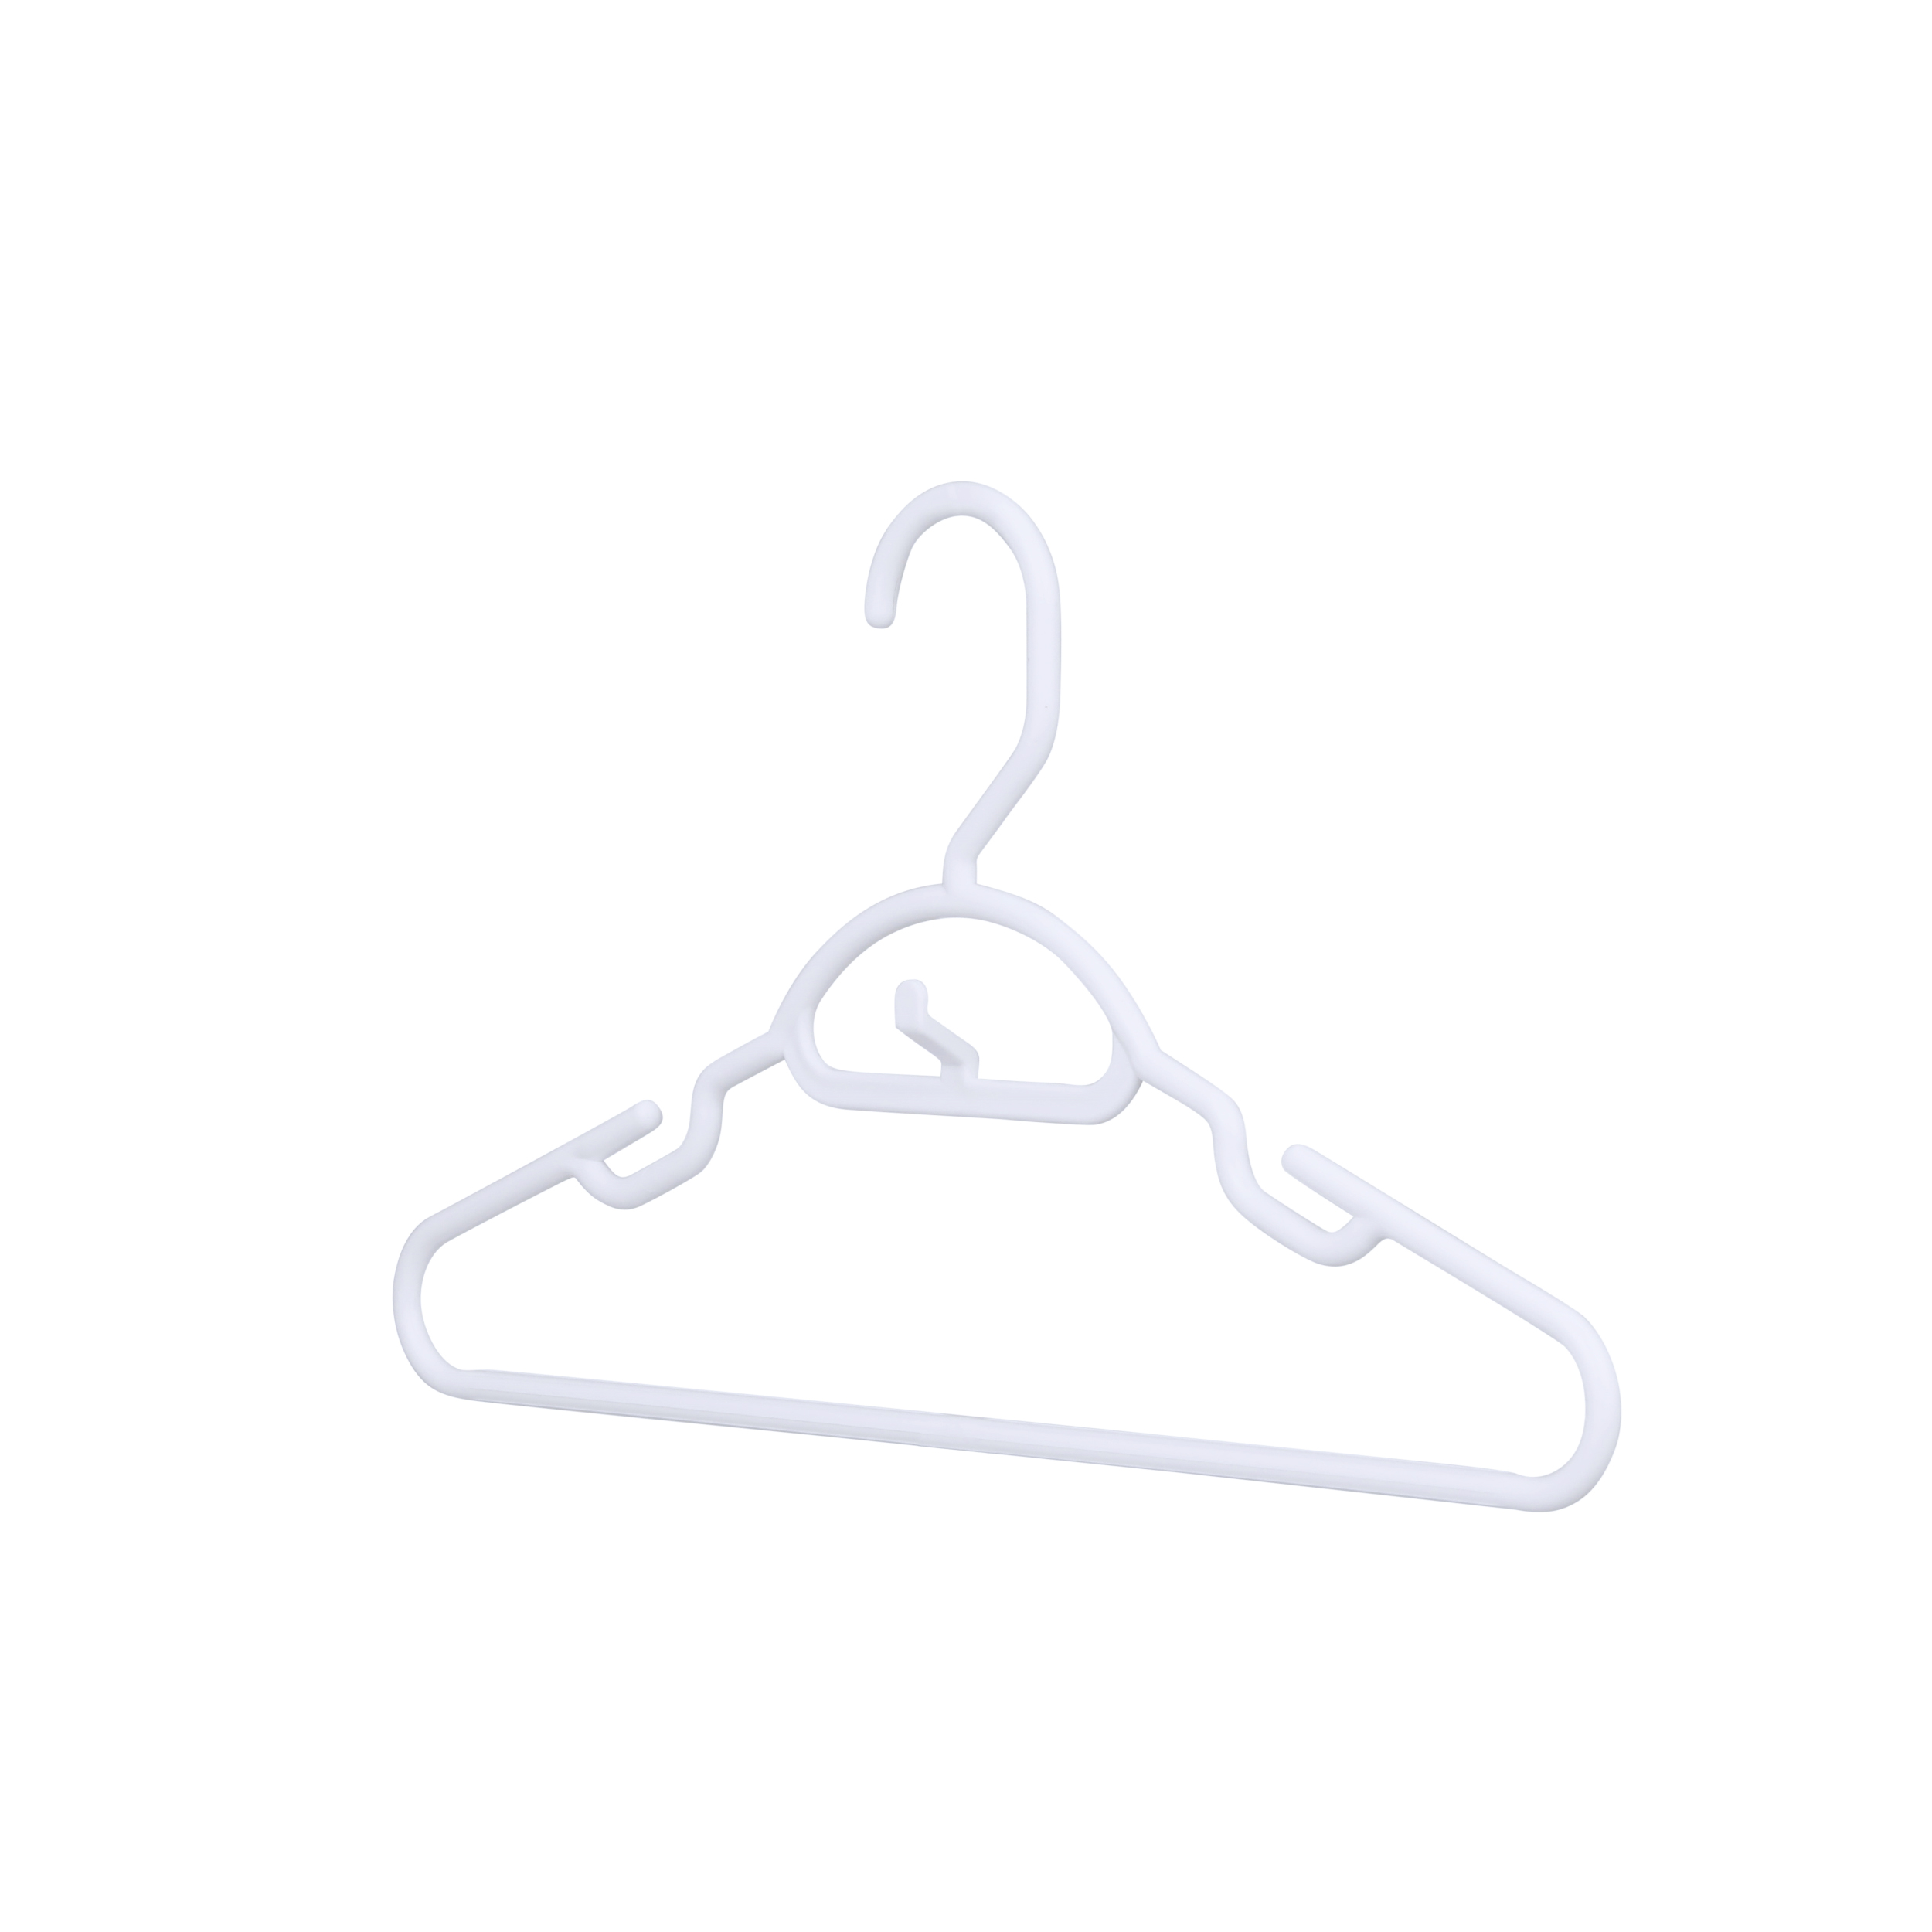  30 Pk Youth Petite Plastic Hangers for Children Clothes Sizes 8  to 14, Petite, Teen, Preteen, Junior, 30 Pack (White) : Home & Kitchen